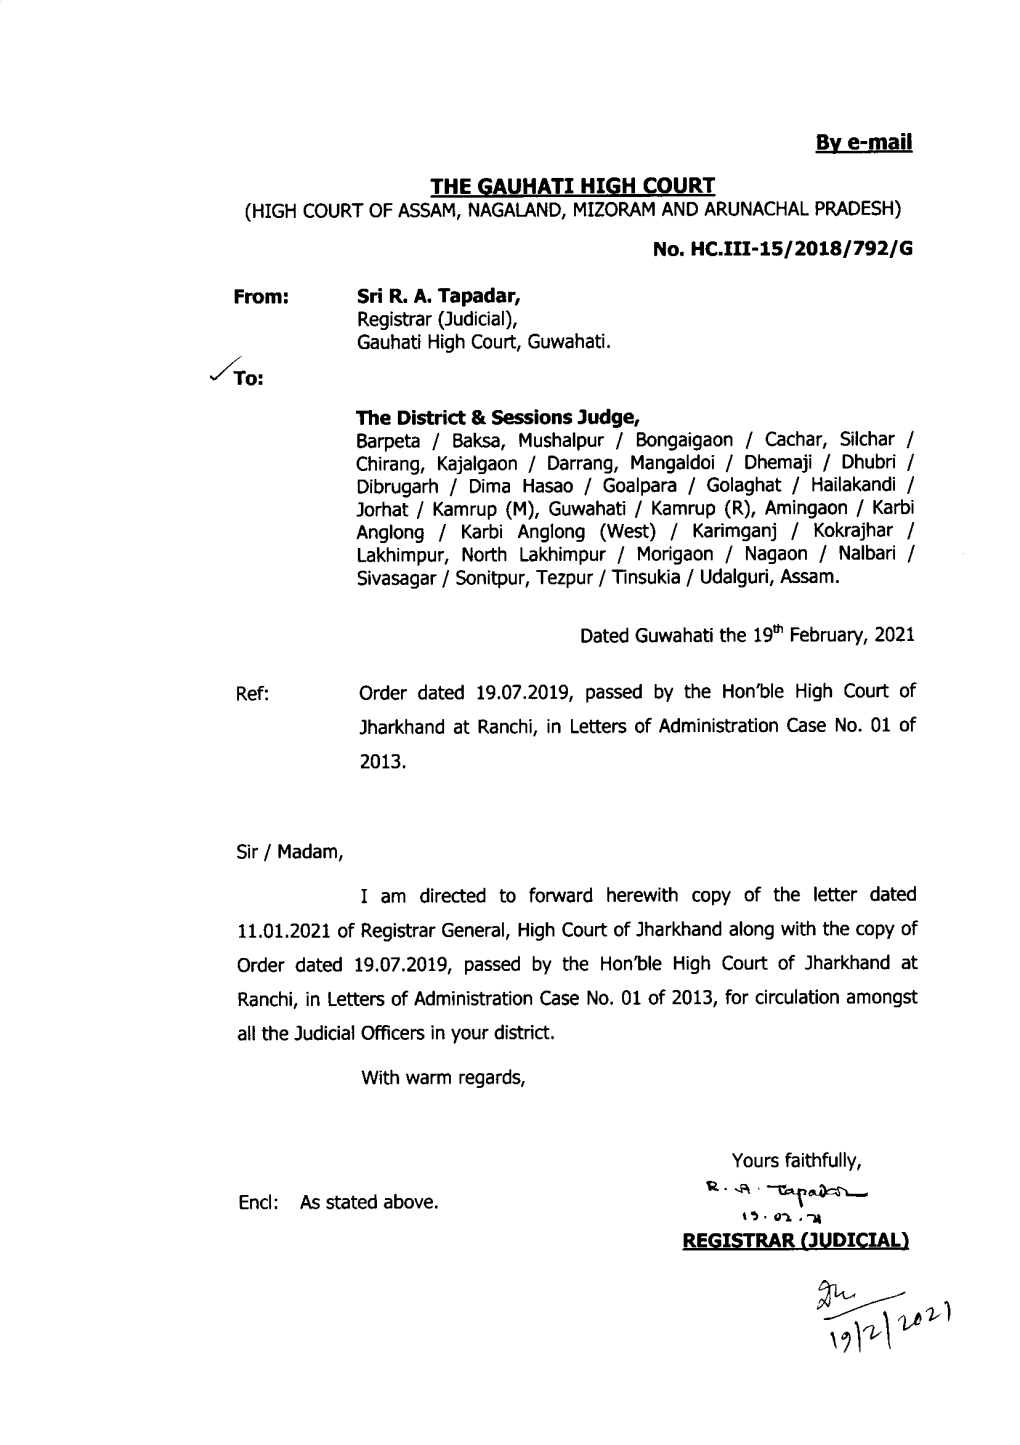 Judgment/Order Dated 19.07.2019, Passed by the Hon'ble High Court